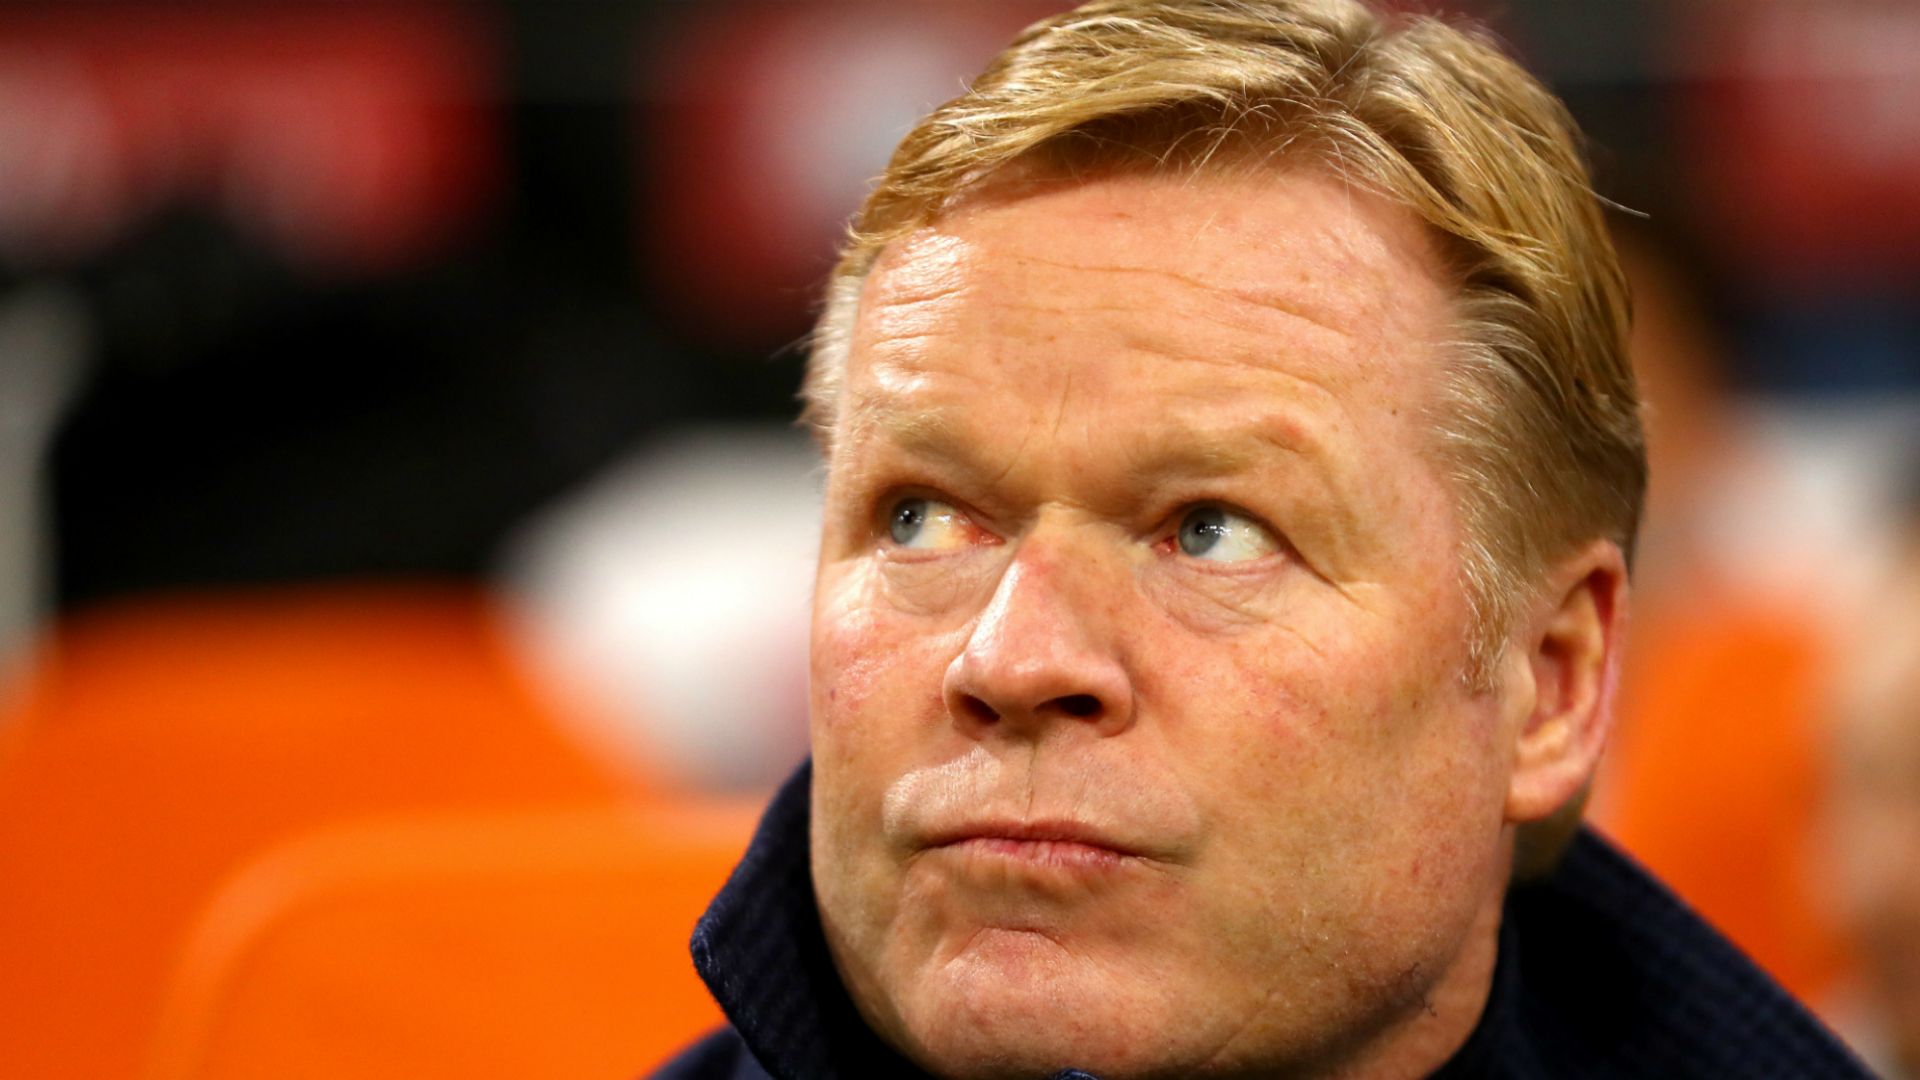 Netherlands boss Ronald Koeman, who underwent heart surgery in May, addressed the Barcelona speculation and his future.